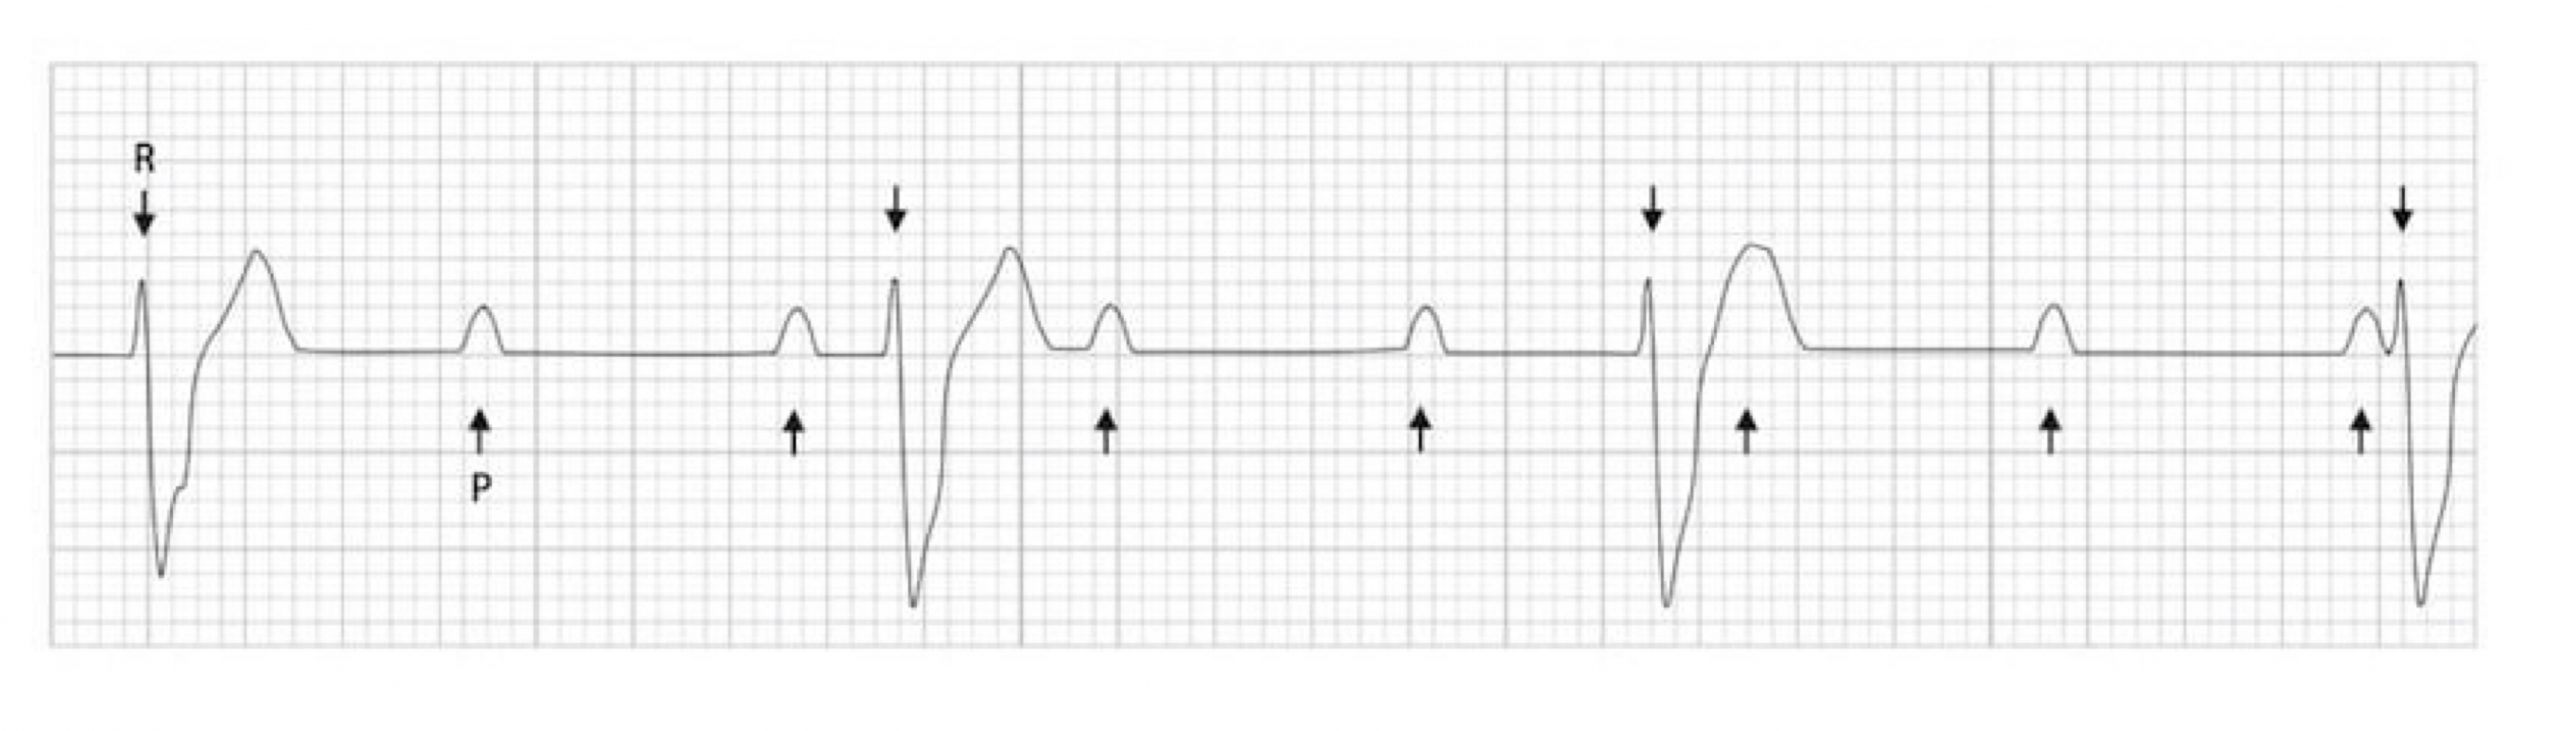 Normal P-waves occur at sinus rate. QRS complexes occur at a much slower rate and are completely independent of the P-waves. Arrows below the ECG point at the P-waves, arrows above the ECG point at the QRS complexes. More frequent arrows below the ECG than above emphasize the difference in atria and ventricular depolarization rates.